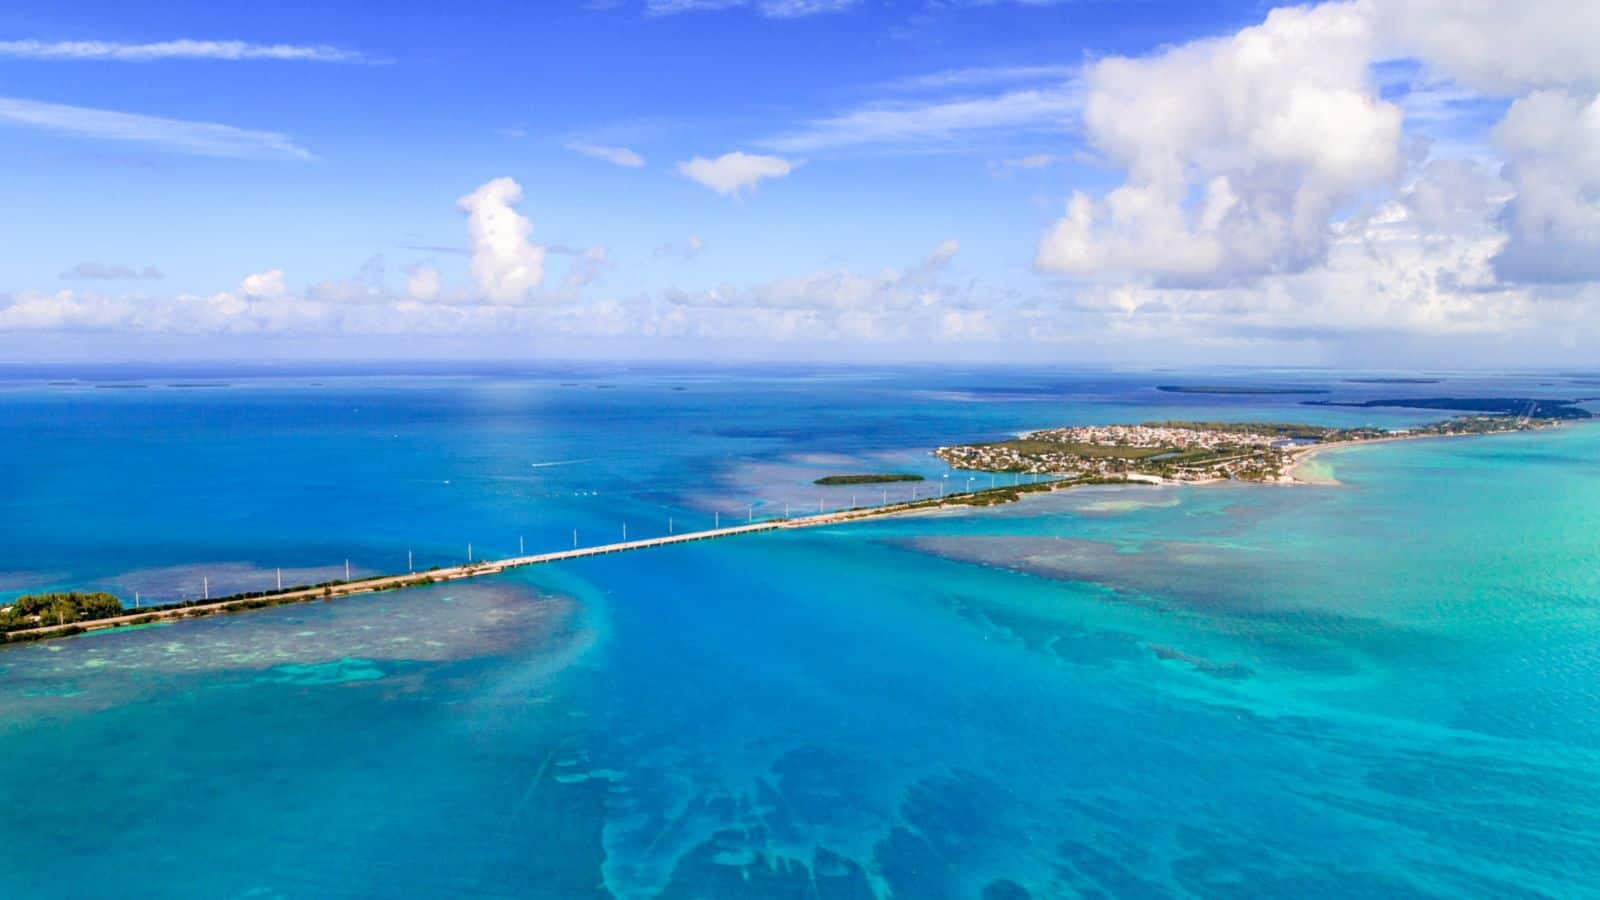 <p>If you’re after a more laid-back experience, then the Florida Keys are the perfect destination. The keys have warm weather, sunshine, and stunning blue waters. If you want to explore, then the best way is to rent a bike and stop off at local cafés when you need to refresh.</p>